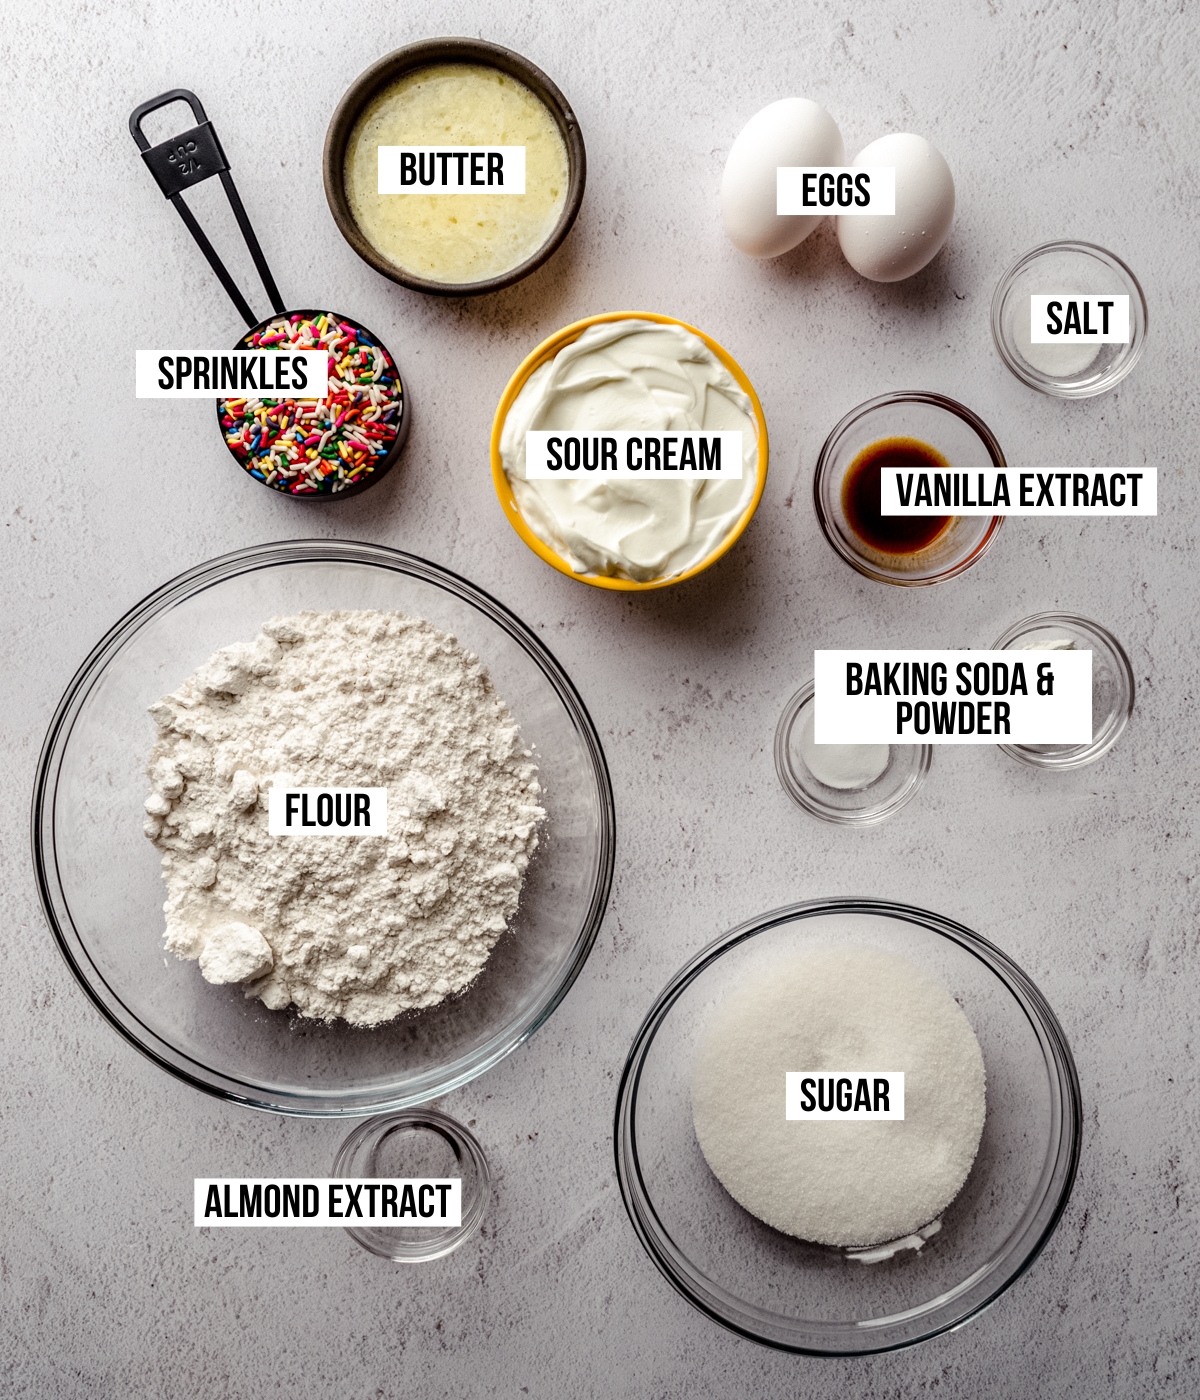 Aerial photo of ingredients for funfetti quick bread with text overlay labeling each ingredient.